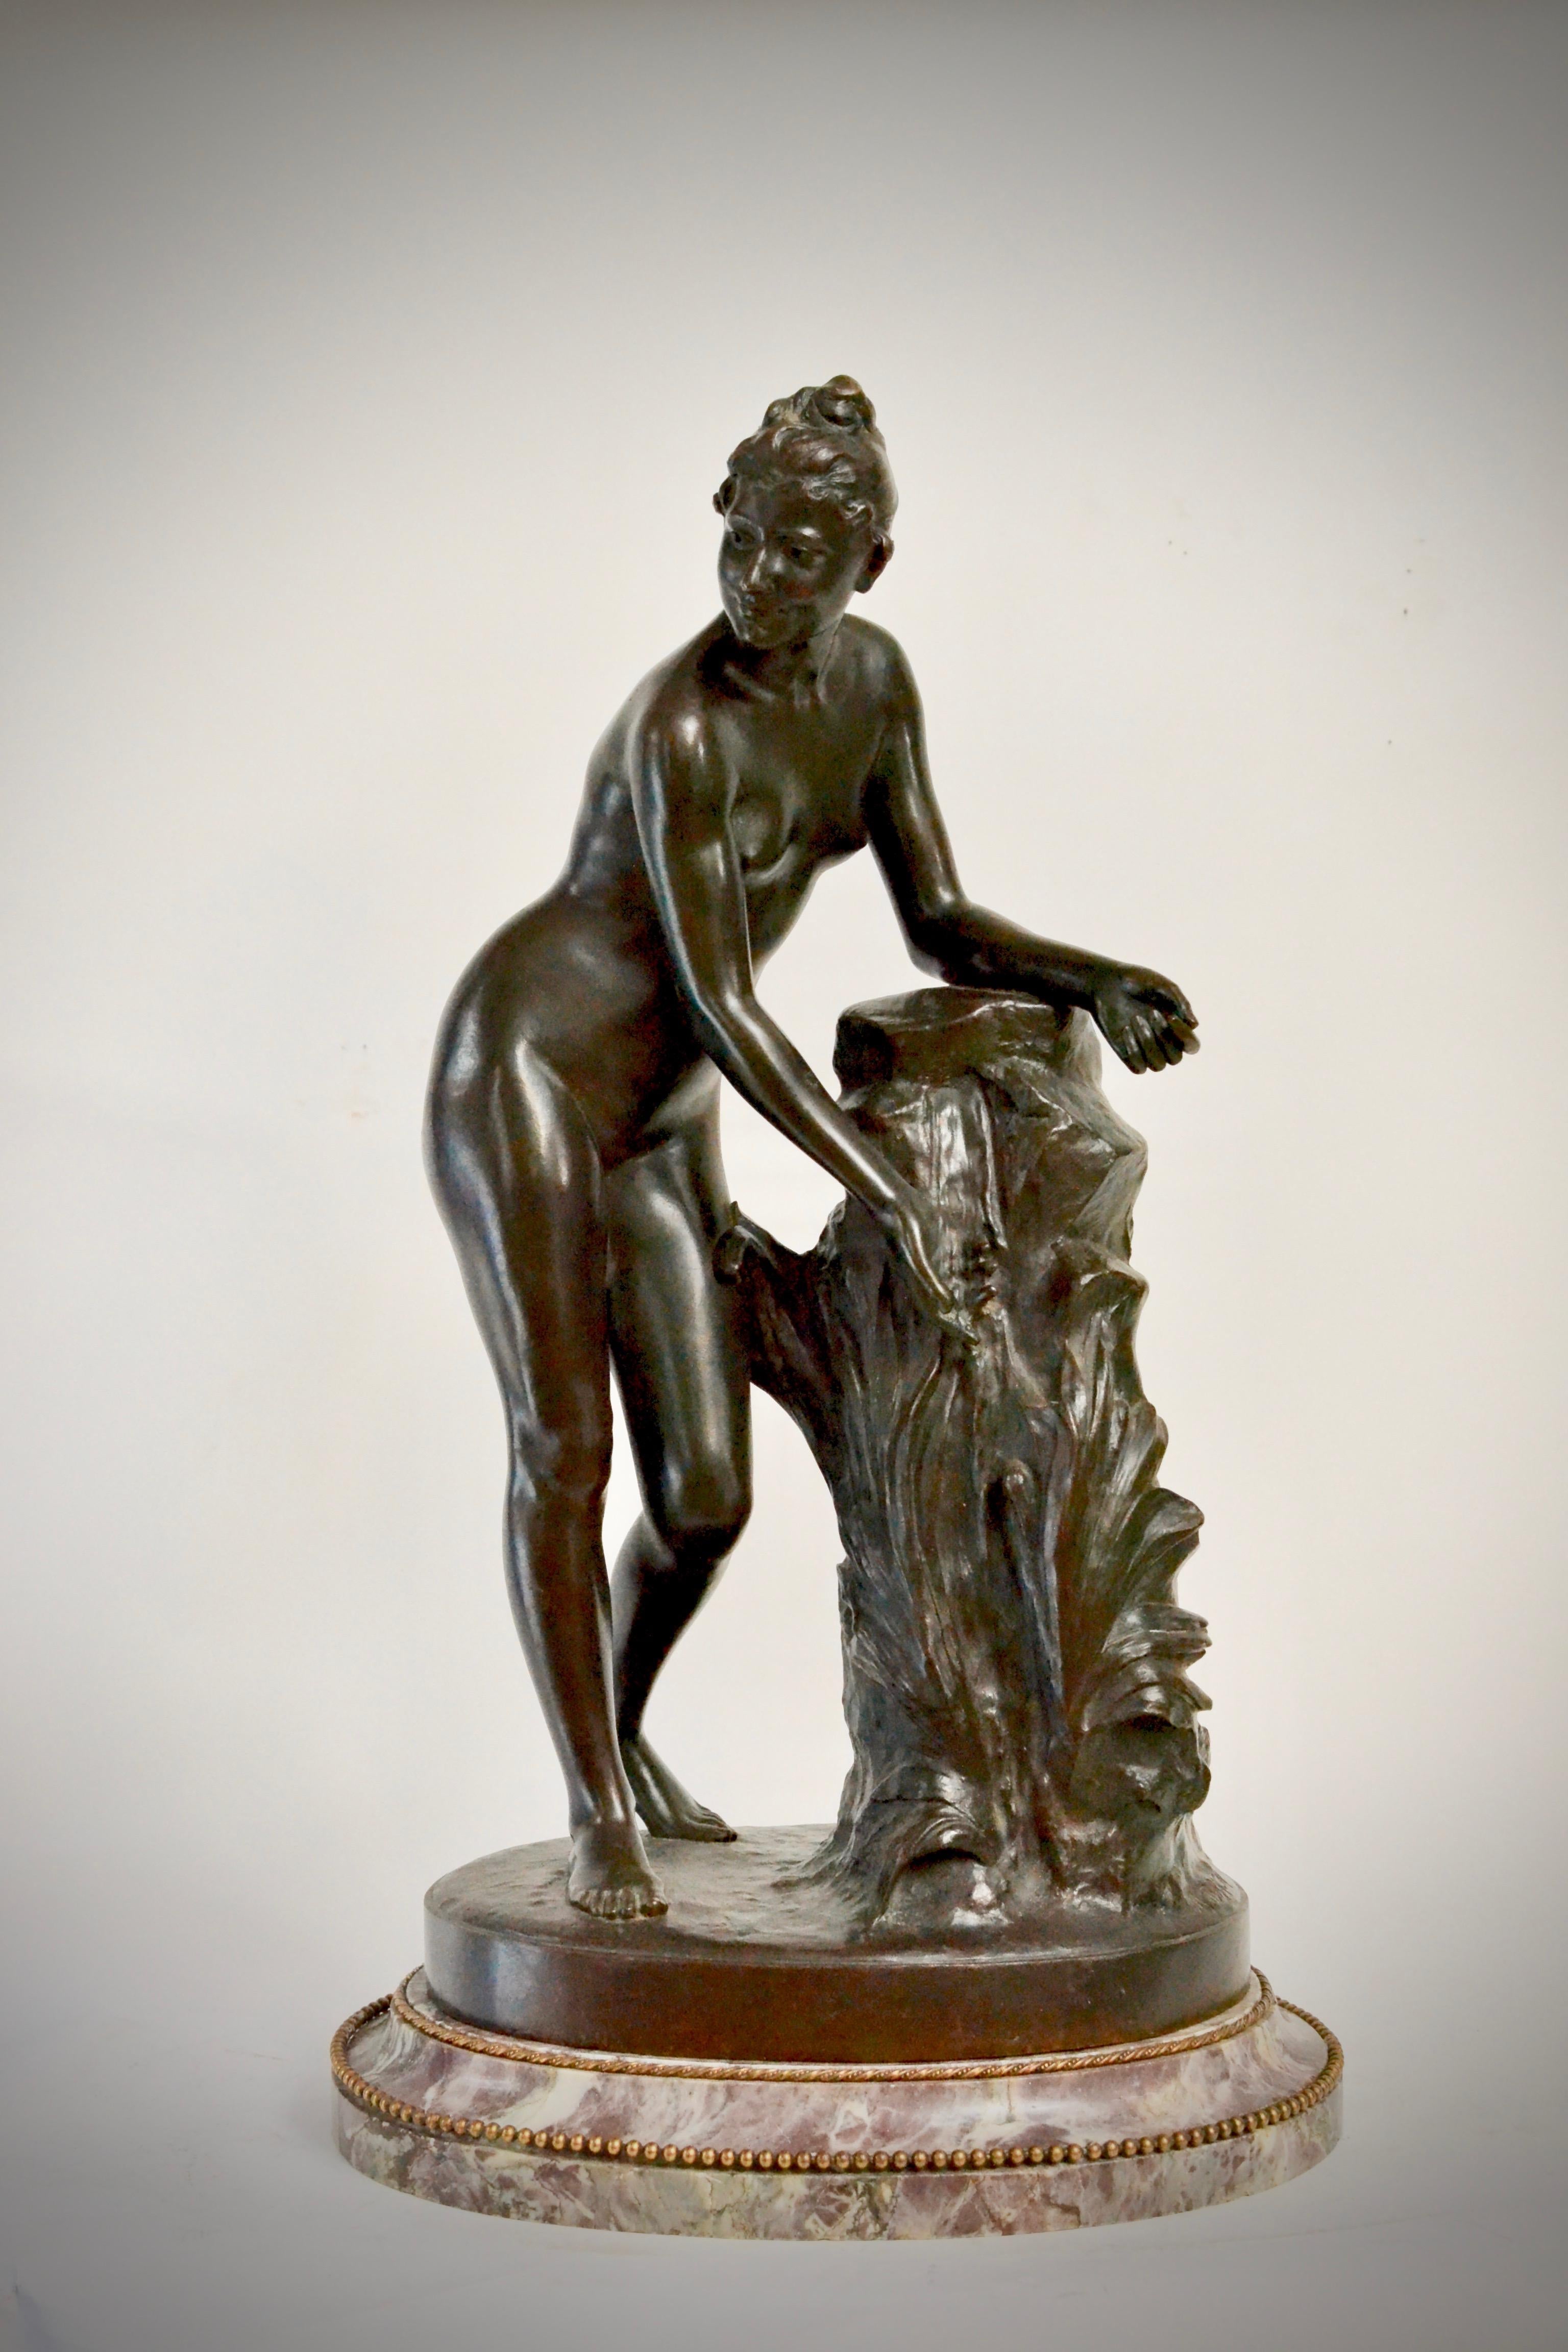 A second half of the 19th century patinated bronze sculpture of a standing woman signed Malvina Brach.